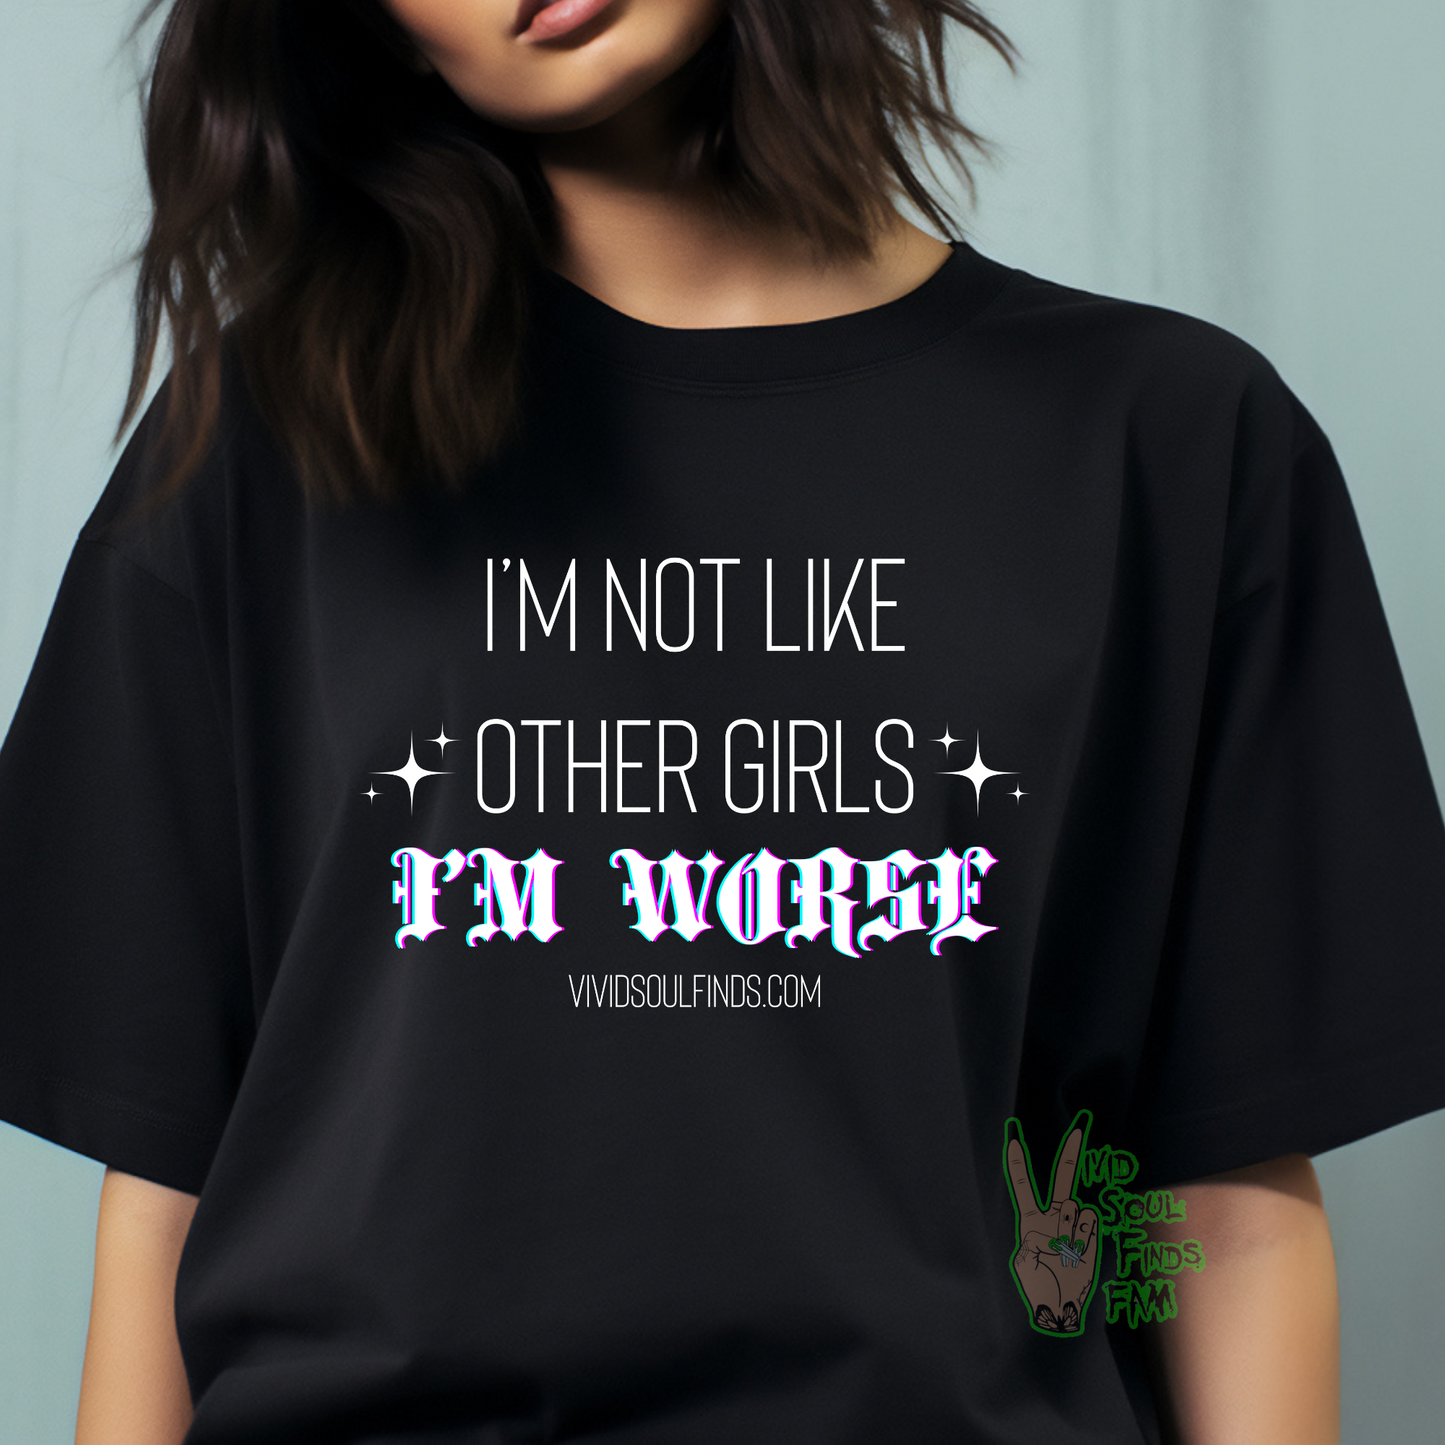 I’m Worse EXCLUSIVE VSF T-shirt